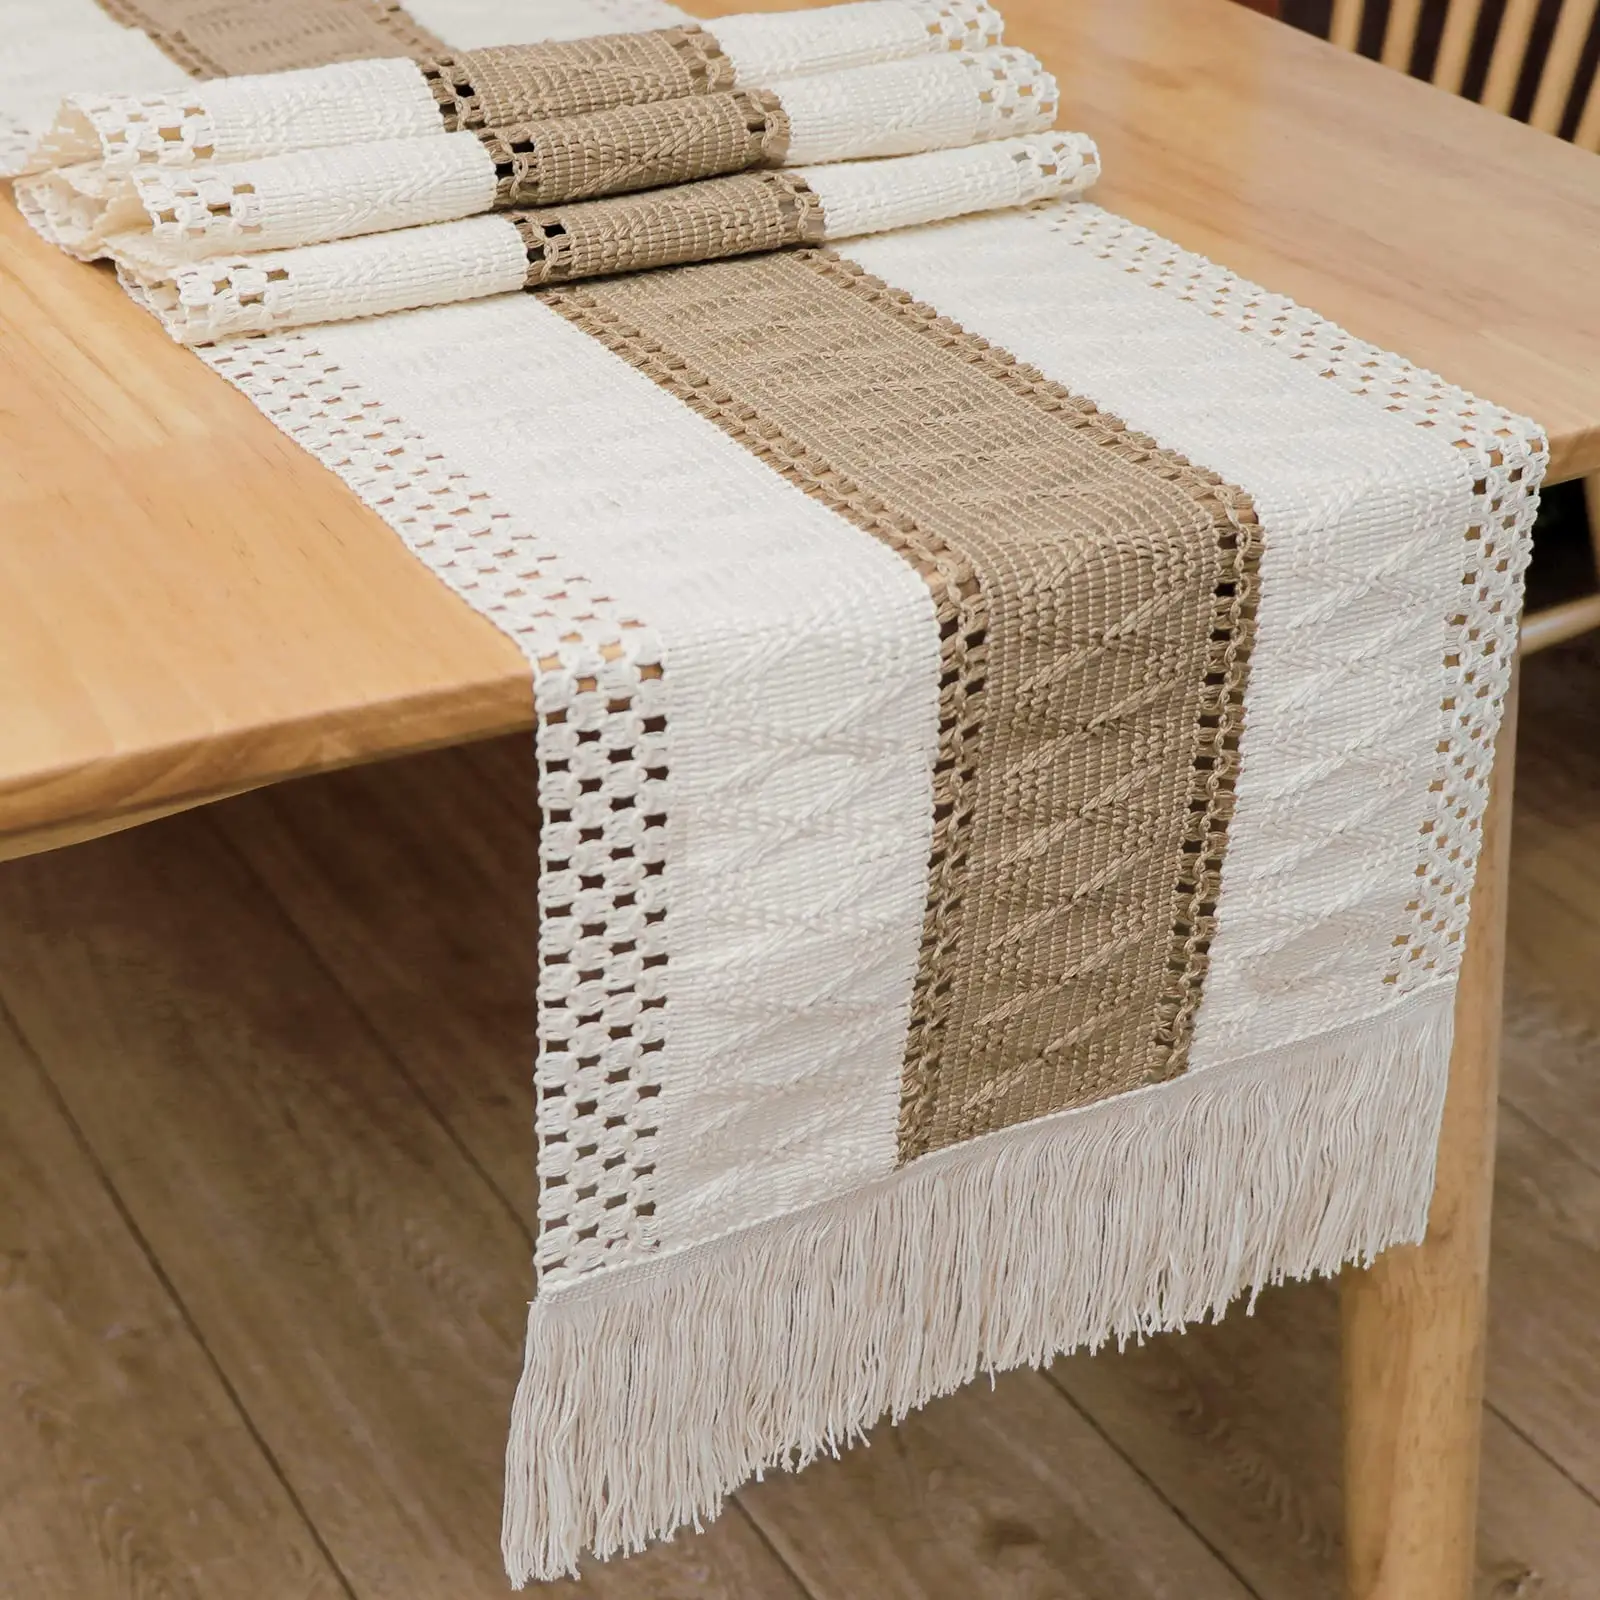 

Jute Table Linen Decorate Tassels Cotton Table Dinner Runner Table Home Europe Splicing Runners Cover For Luxury Boho Decor With